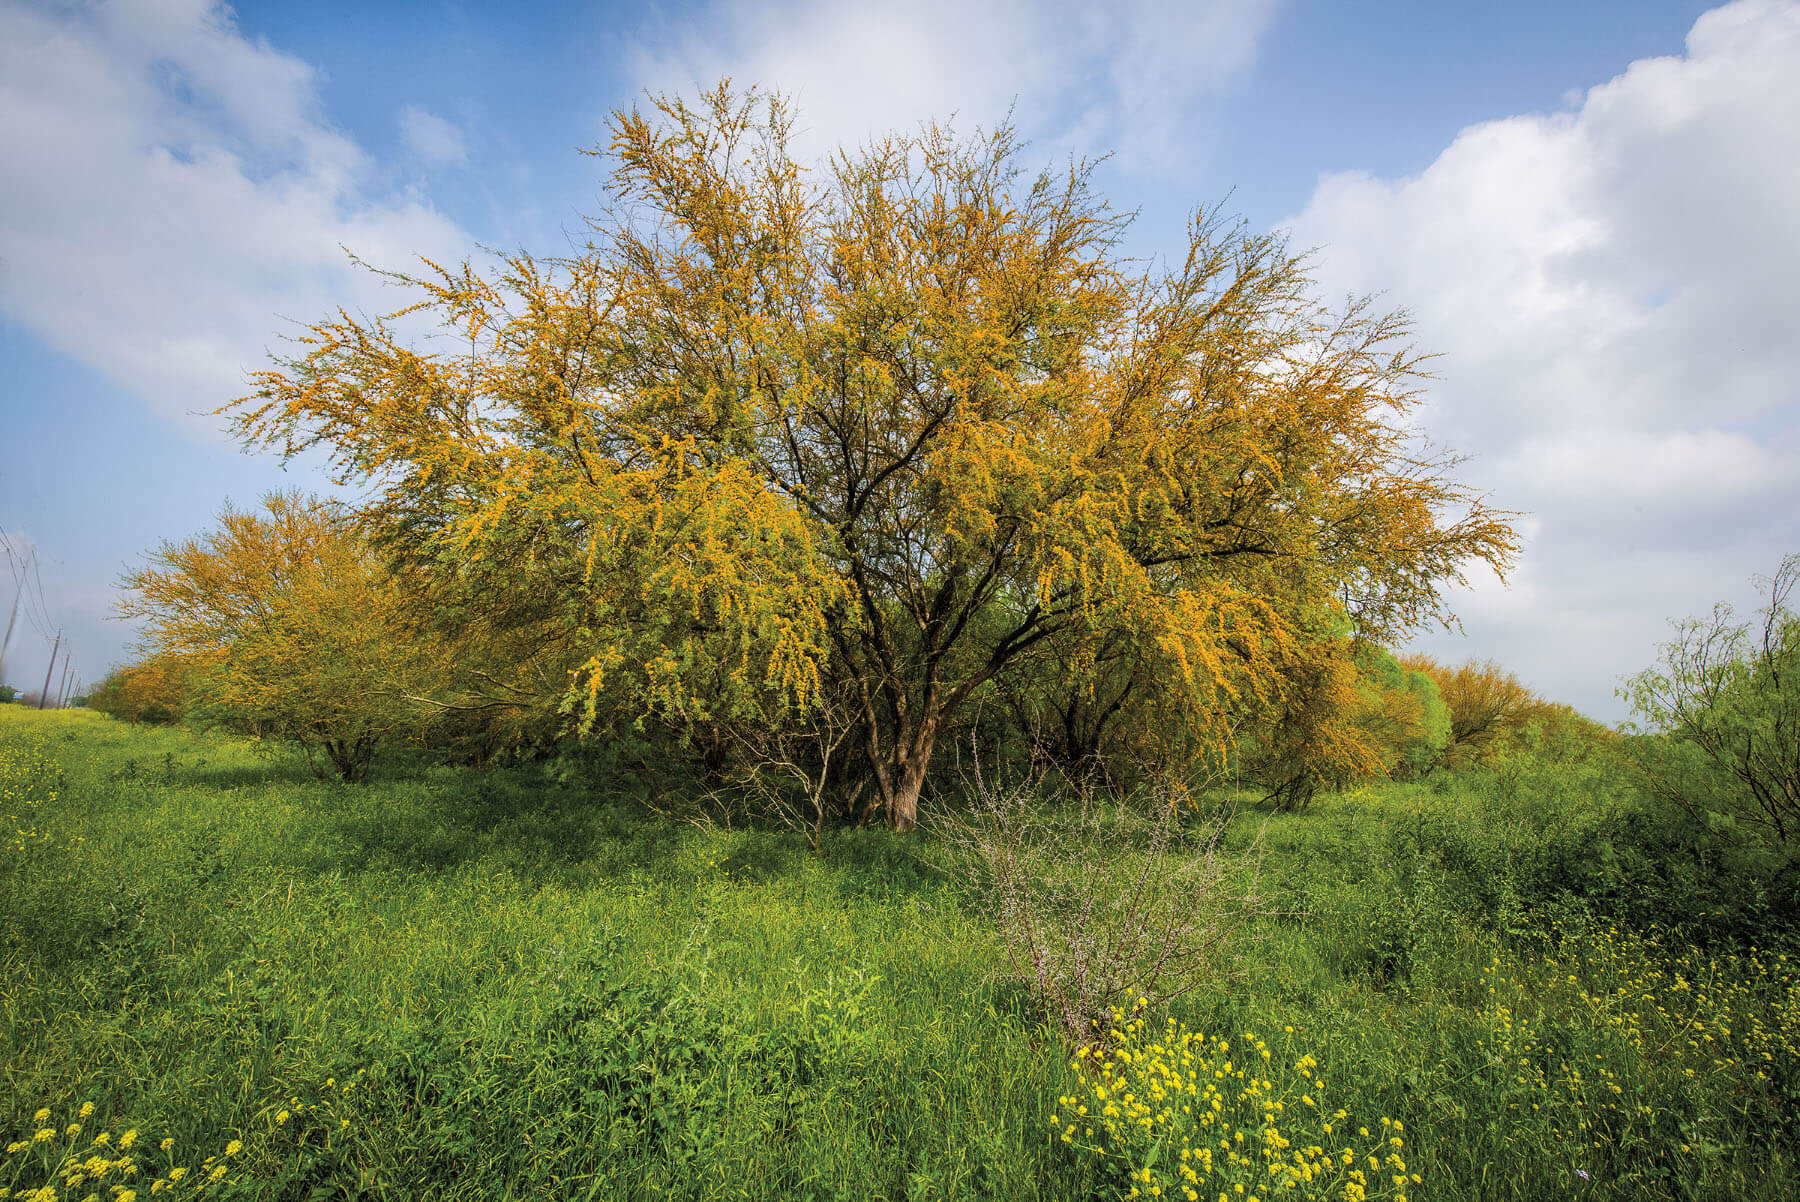 A golden tree in a field of green grass and yellow flowers